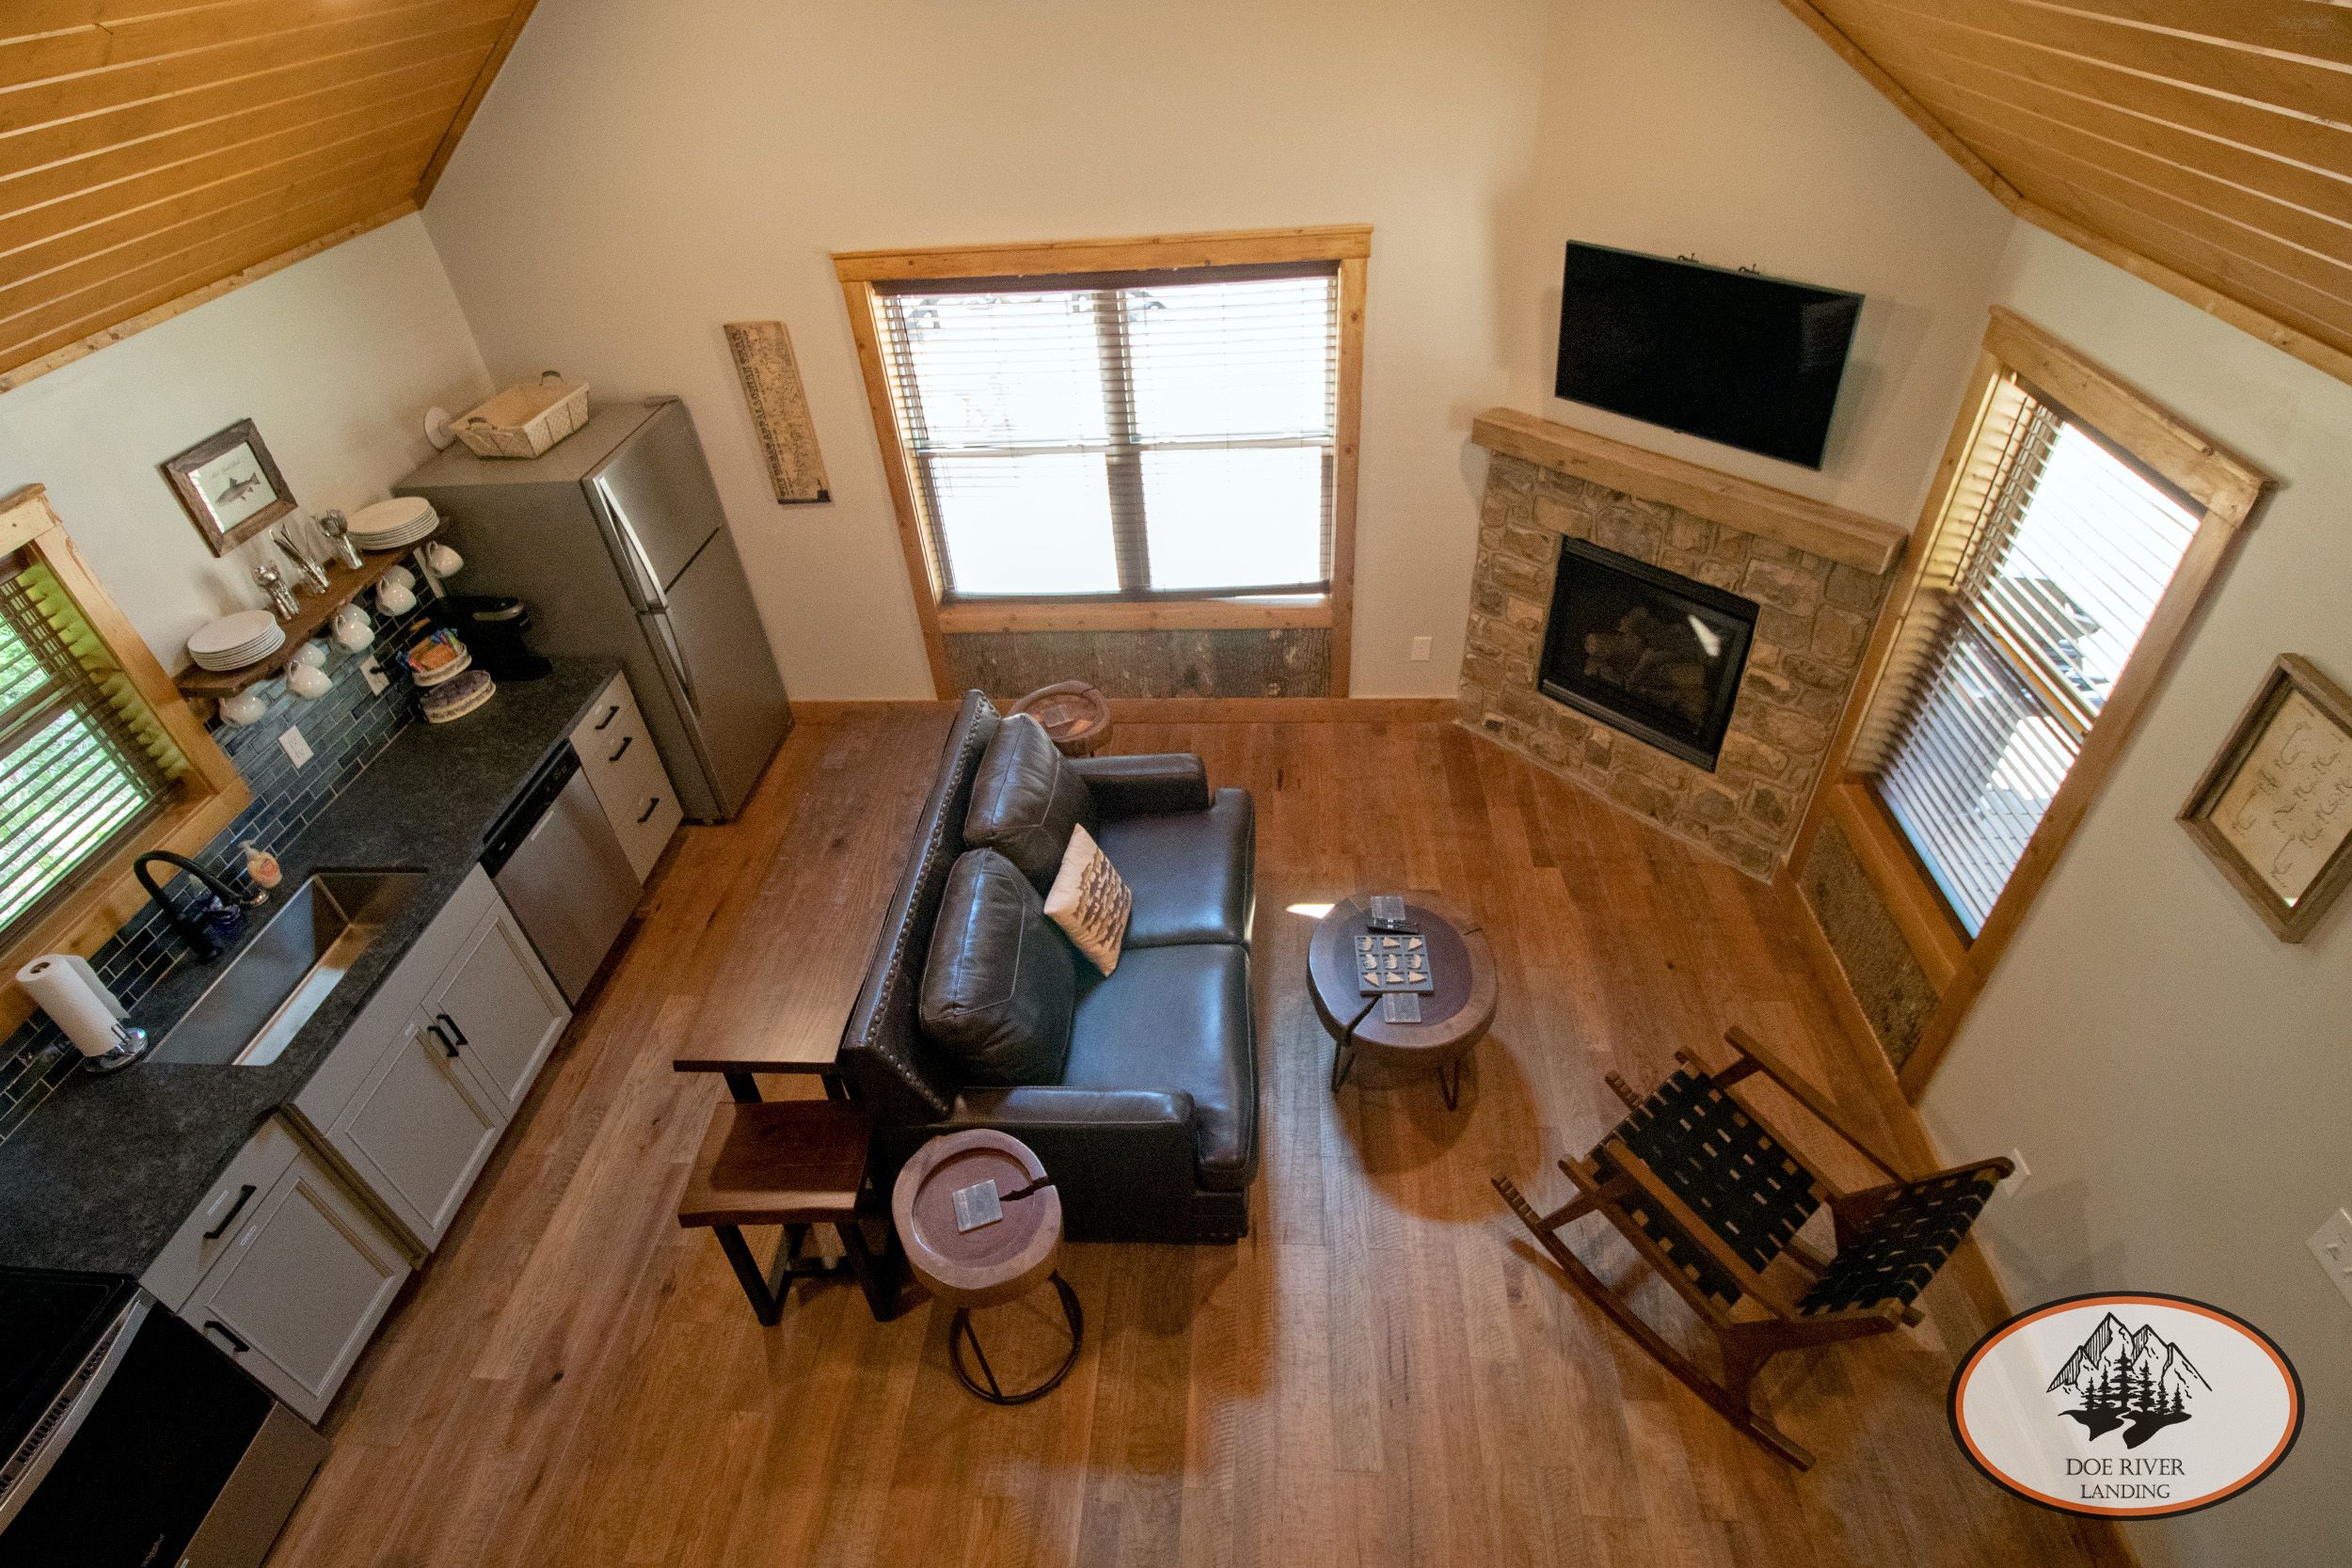 Doe River Landing campground in Roan Mountain, TN. Best vacation rental near Elizabethton, TN and Johnson City TN. Trout Cabin riversideluxury cabin features a loft, fully furnished living area and kitchen.